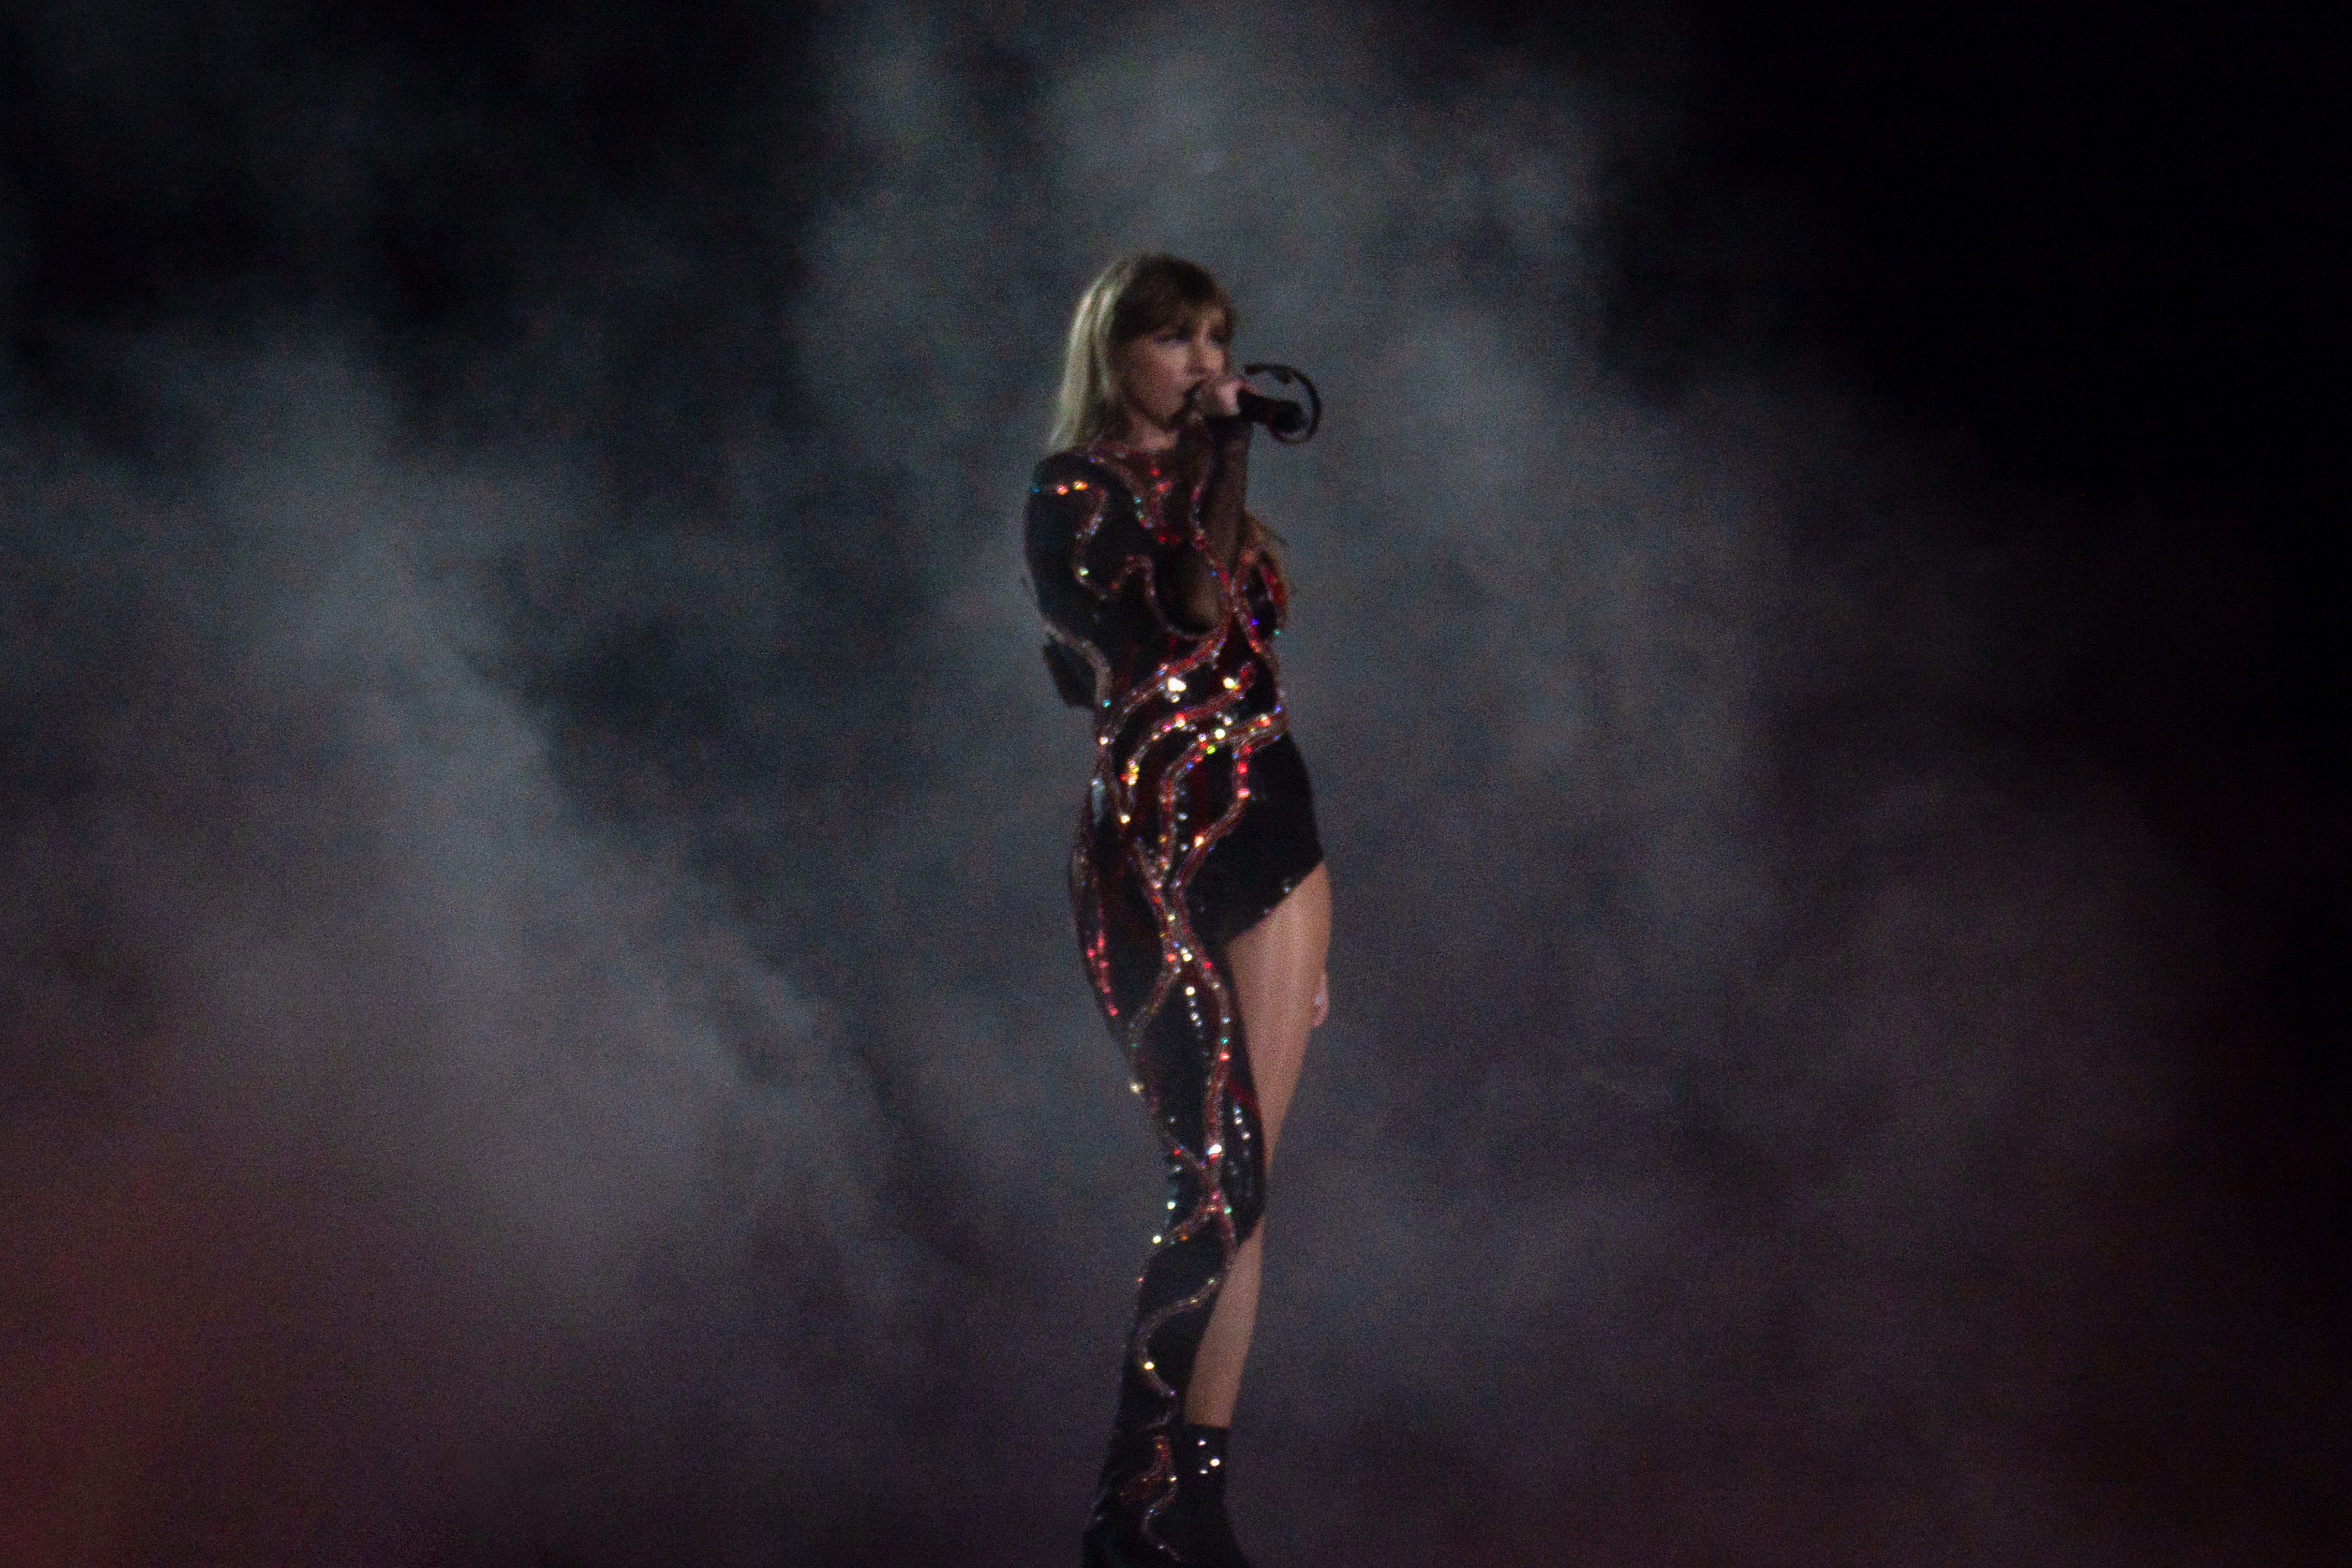 “It’s been a long time coming:” Taylor Swift’s The Eras Tour